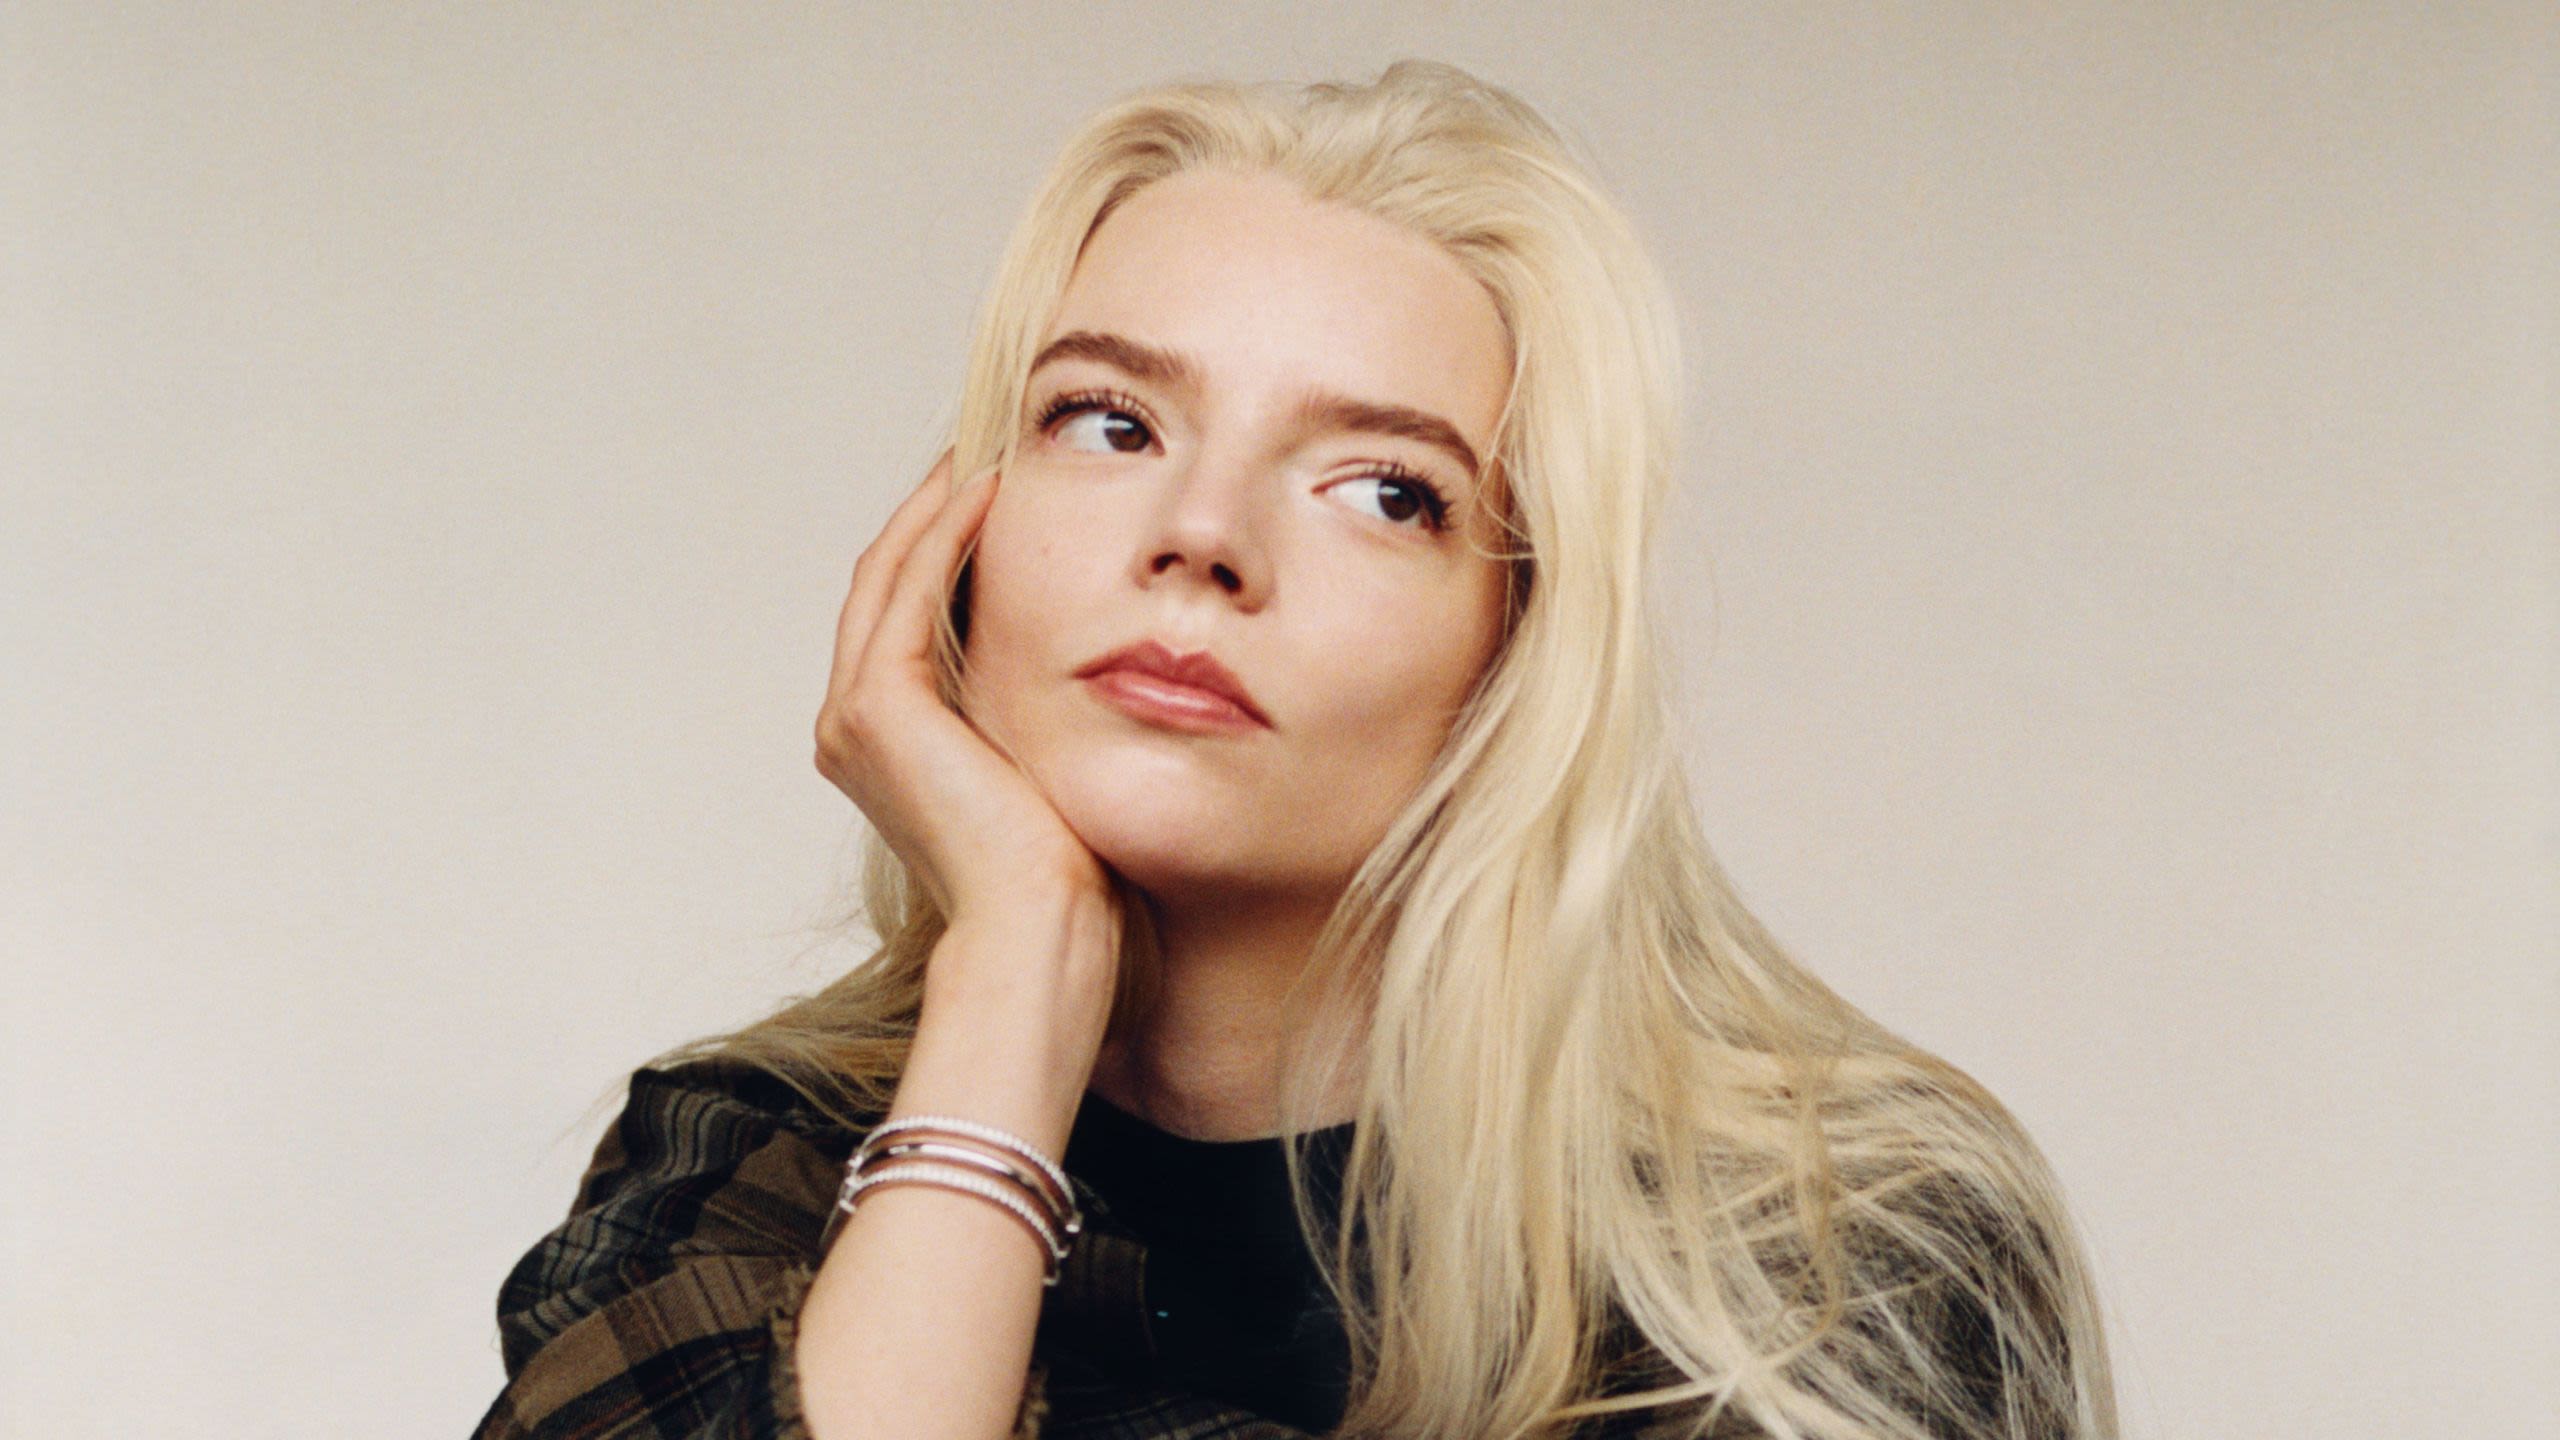 Anya Taylor-Joy on Eloping and Being ‘Completely and Utterly in Love’ With Malcolm McRae